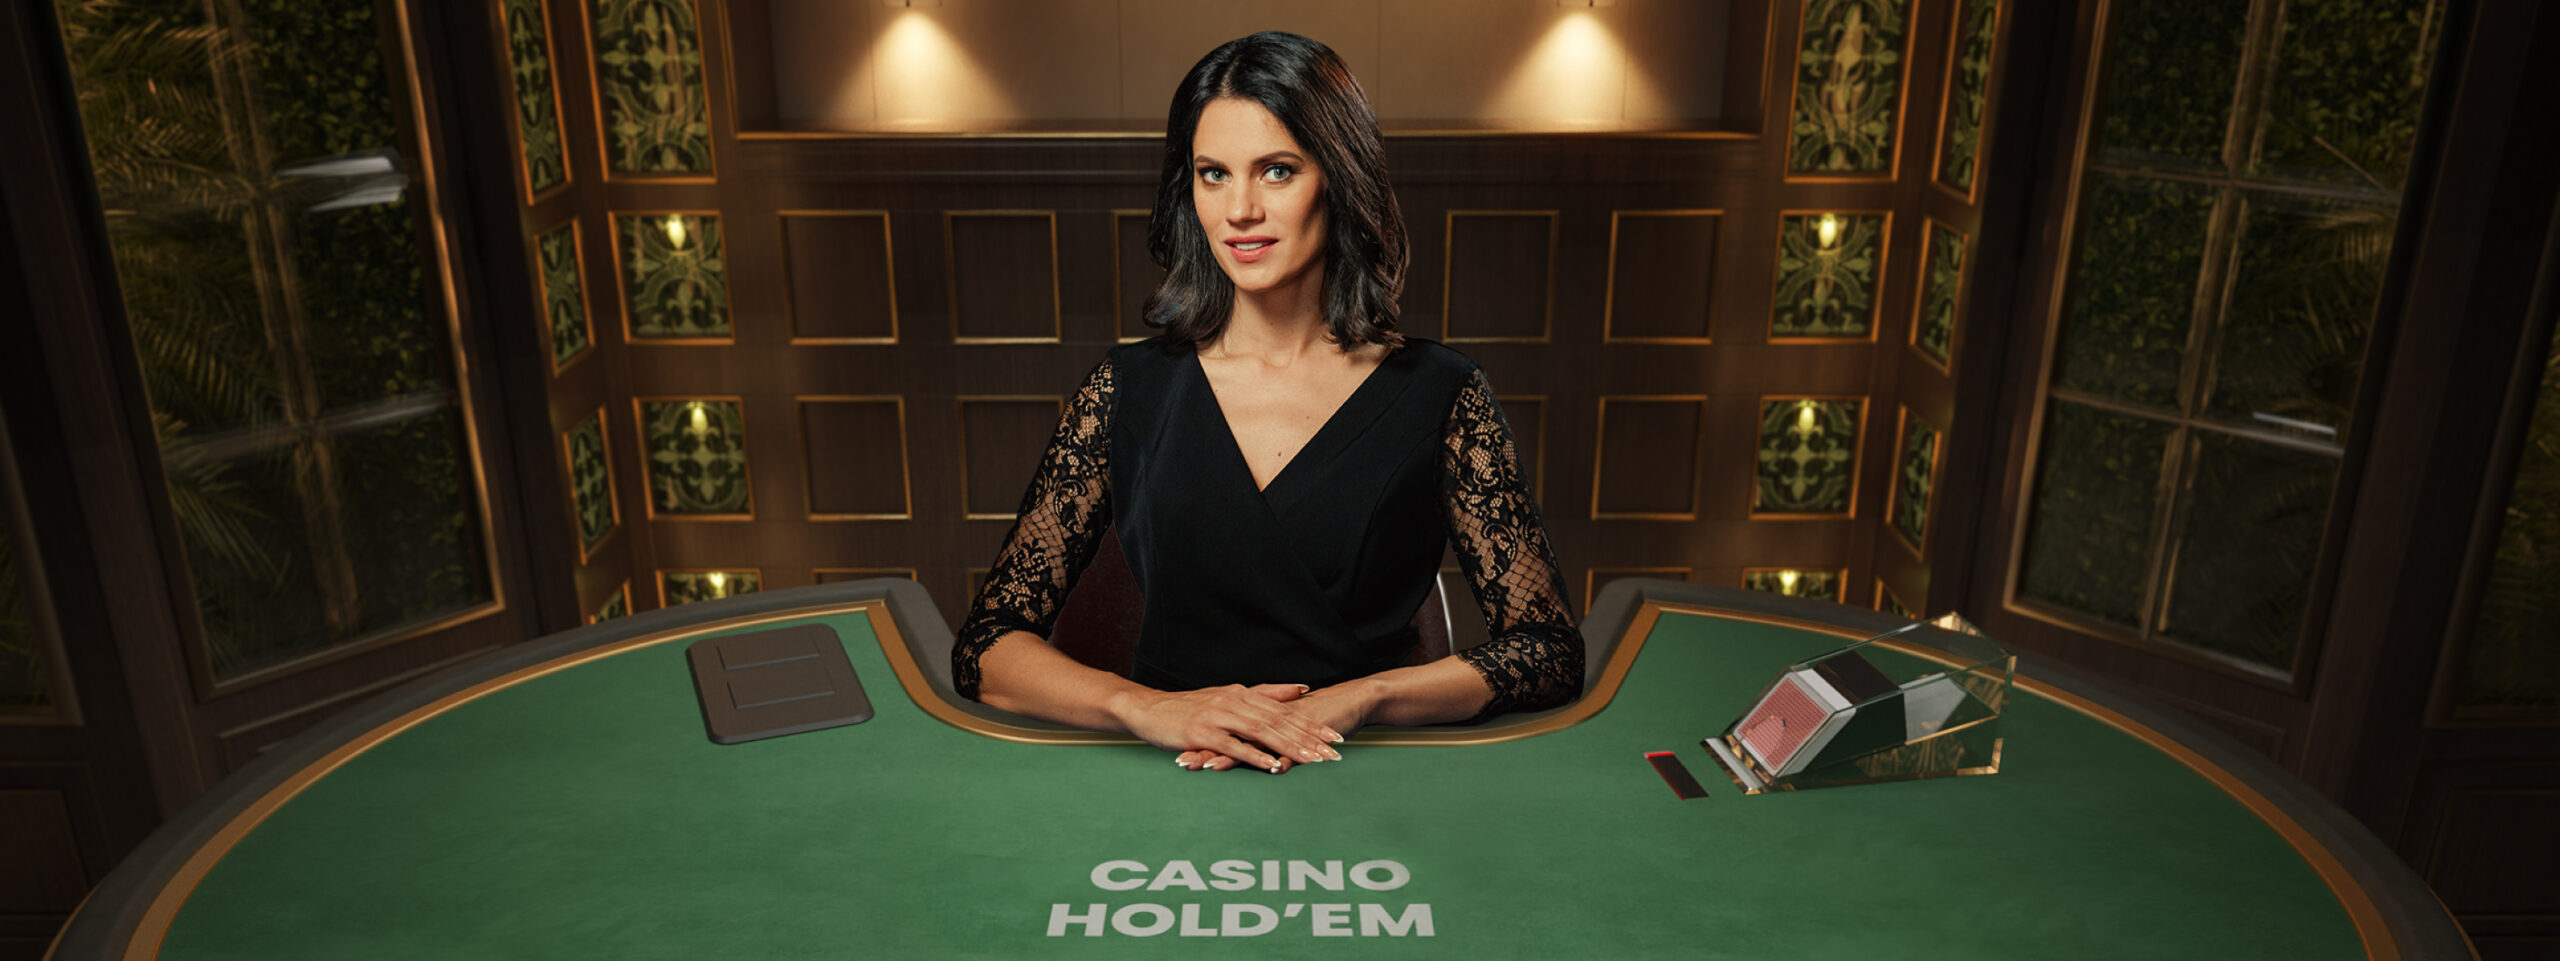 Female game presenter behind the table in a screenshot of Casino Hold'em.